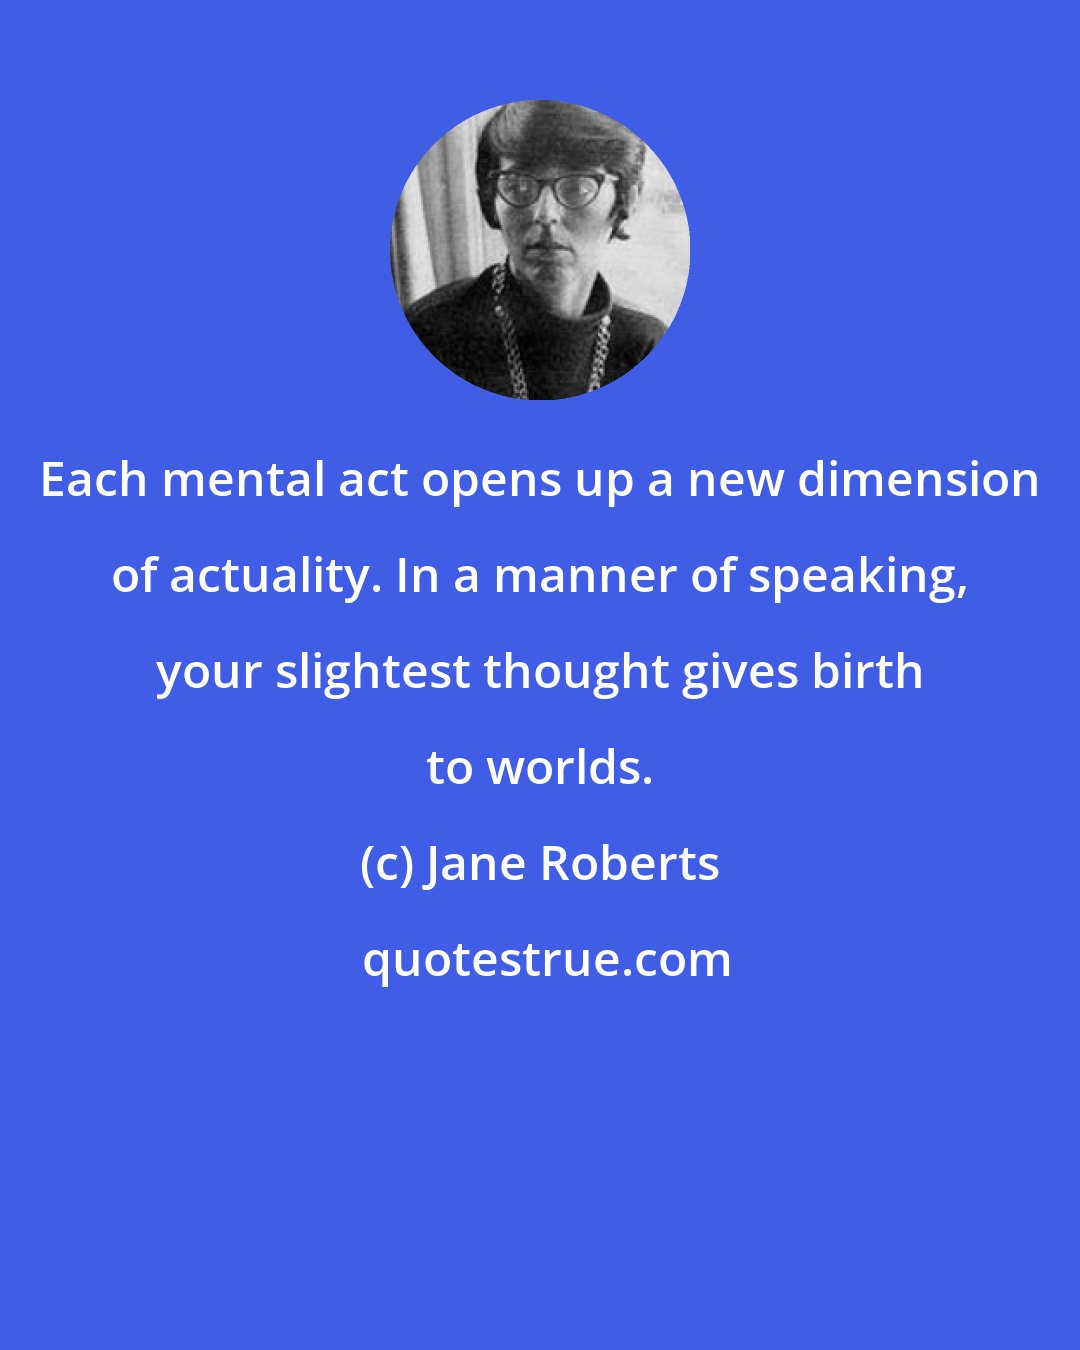 Jane Roberts: Each mental act opens up a new dimension of actuality. In a manner of speaking, your slightest thought gives birth to worlds.